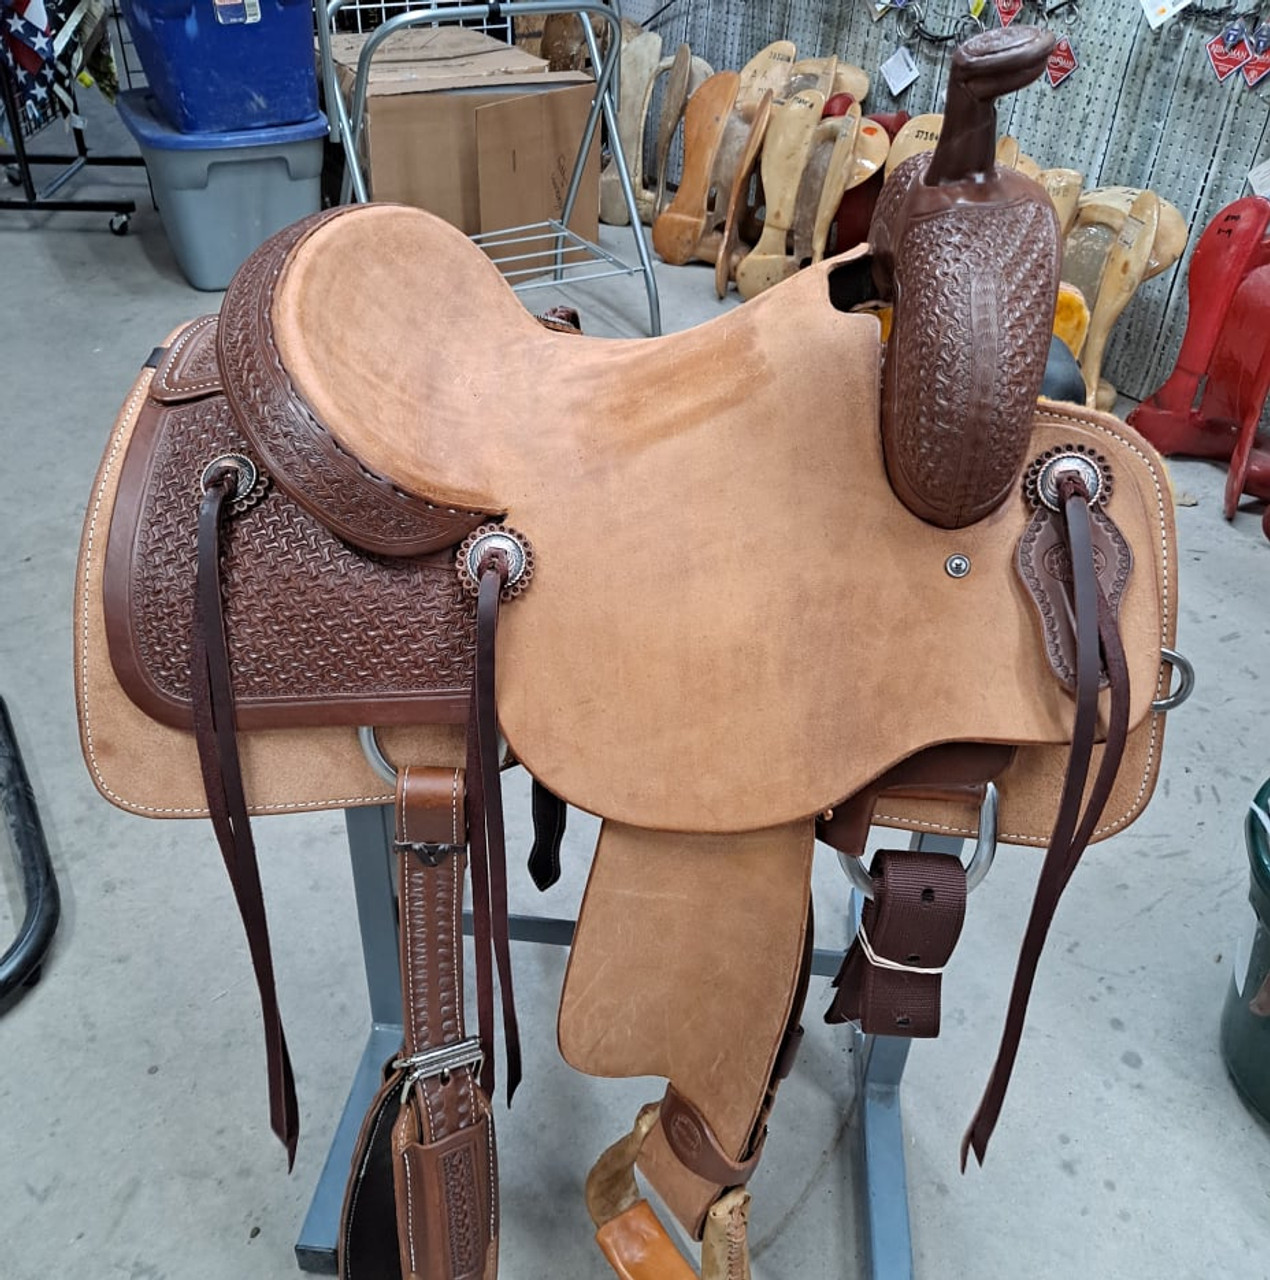 New Ranch Cutter by Fort Worth Saddle Co with 15 inch seat. Hermann Oak leather. Roughout contact points and skirt. Hand tooled rear chassis, cantle, and pommel. Gullet size is 7 inch, weight is 35lbs, and skirt is 27.5 inch. Made in USA. Limited lifetime warranty.

S1485